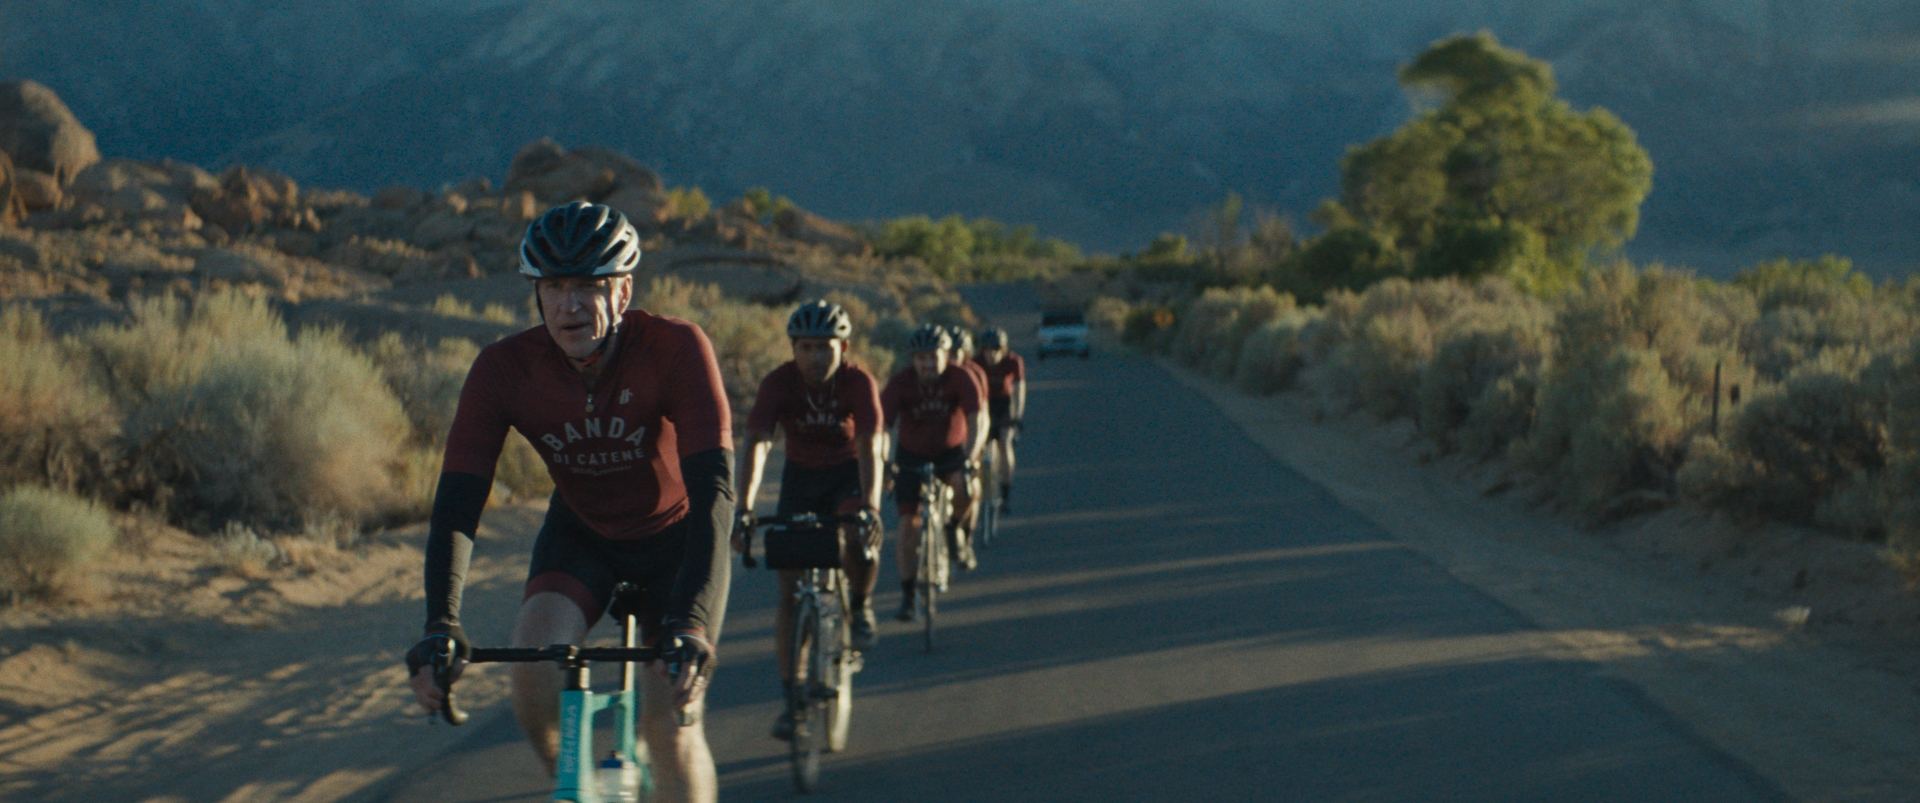 Hard Miles | Jahking Guillory, Jackson Kelly, Damien Diaz, and Zachary T. Robbins on Remarkable True Story and Cycling